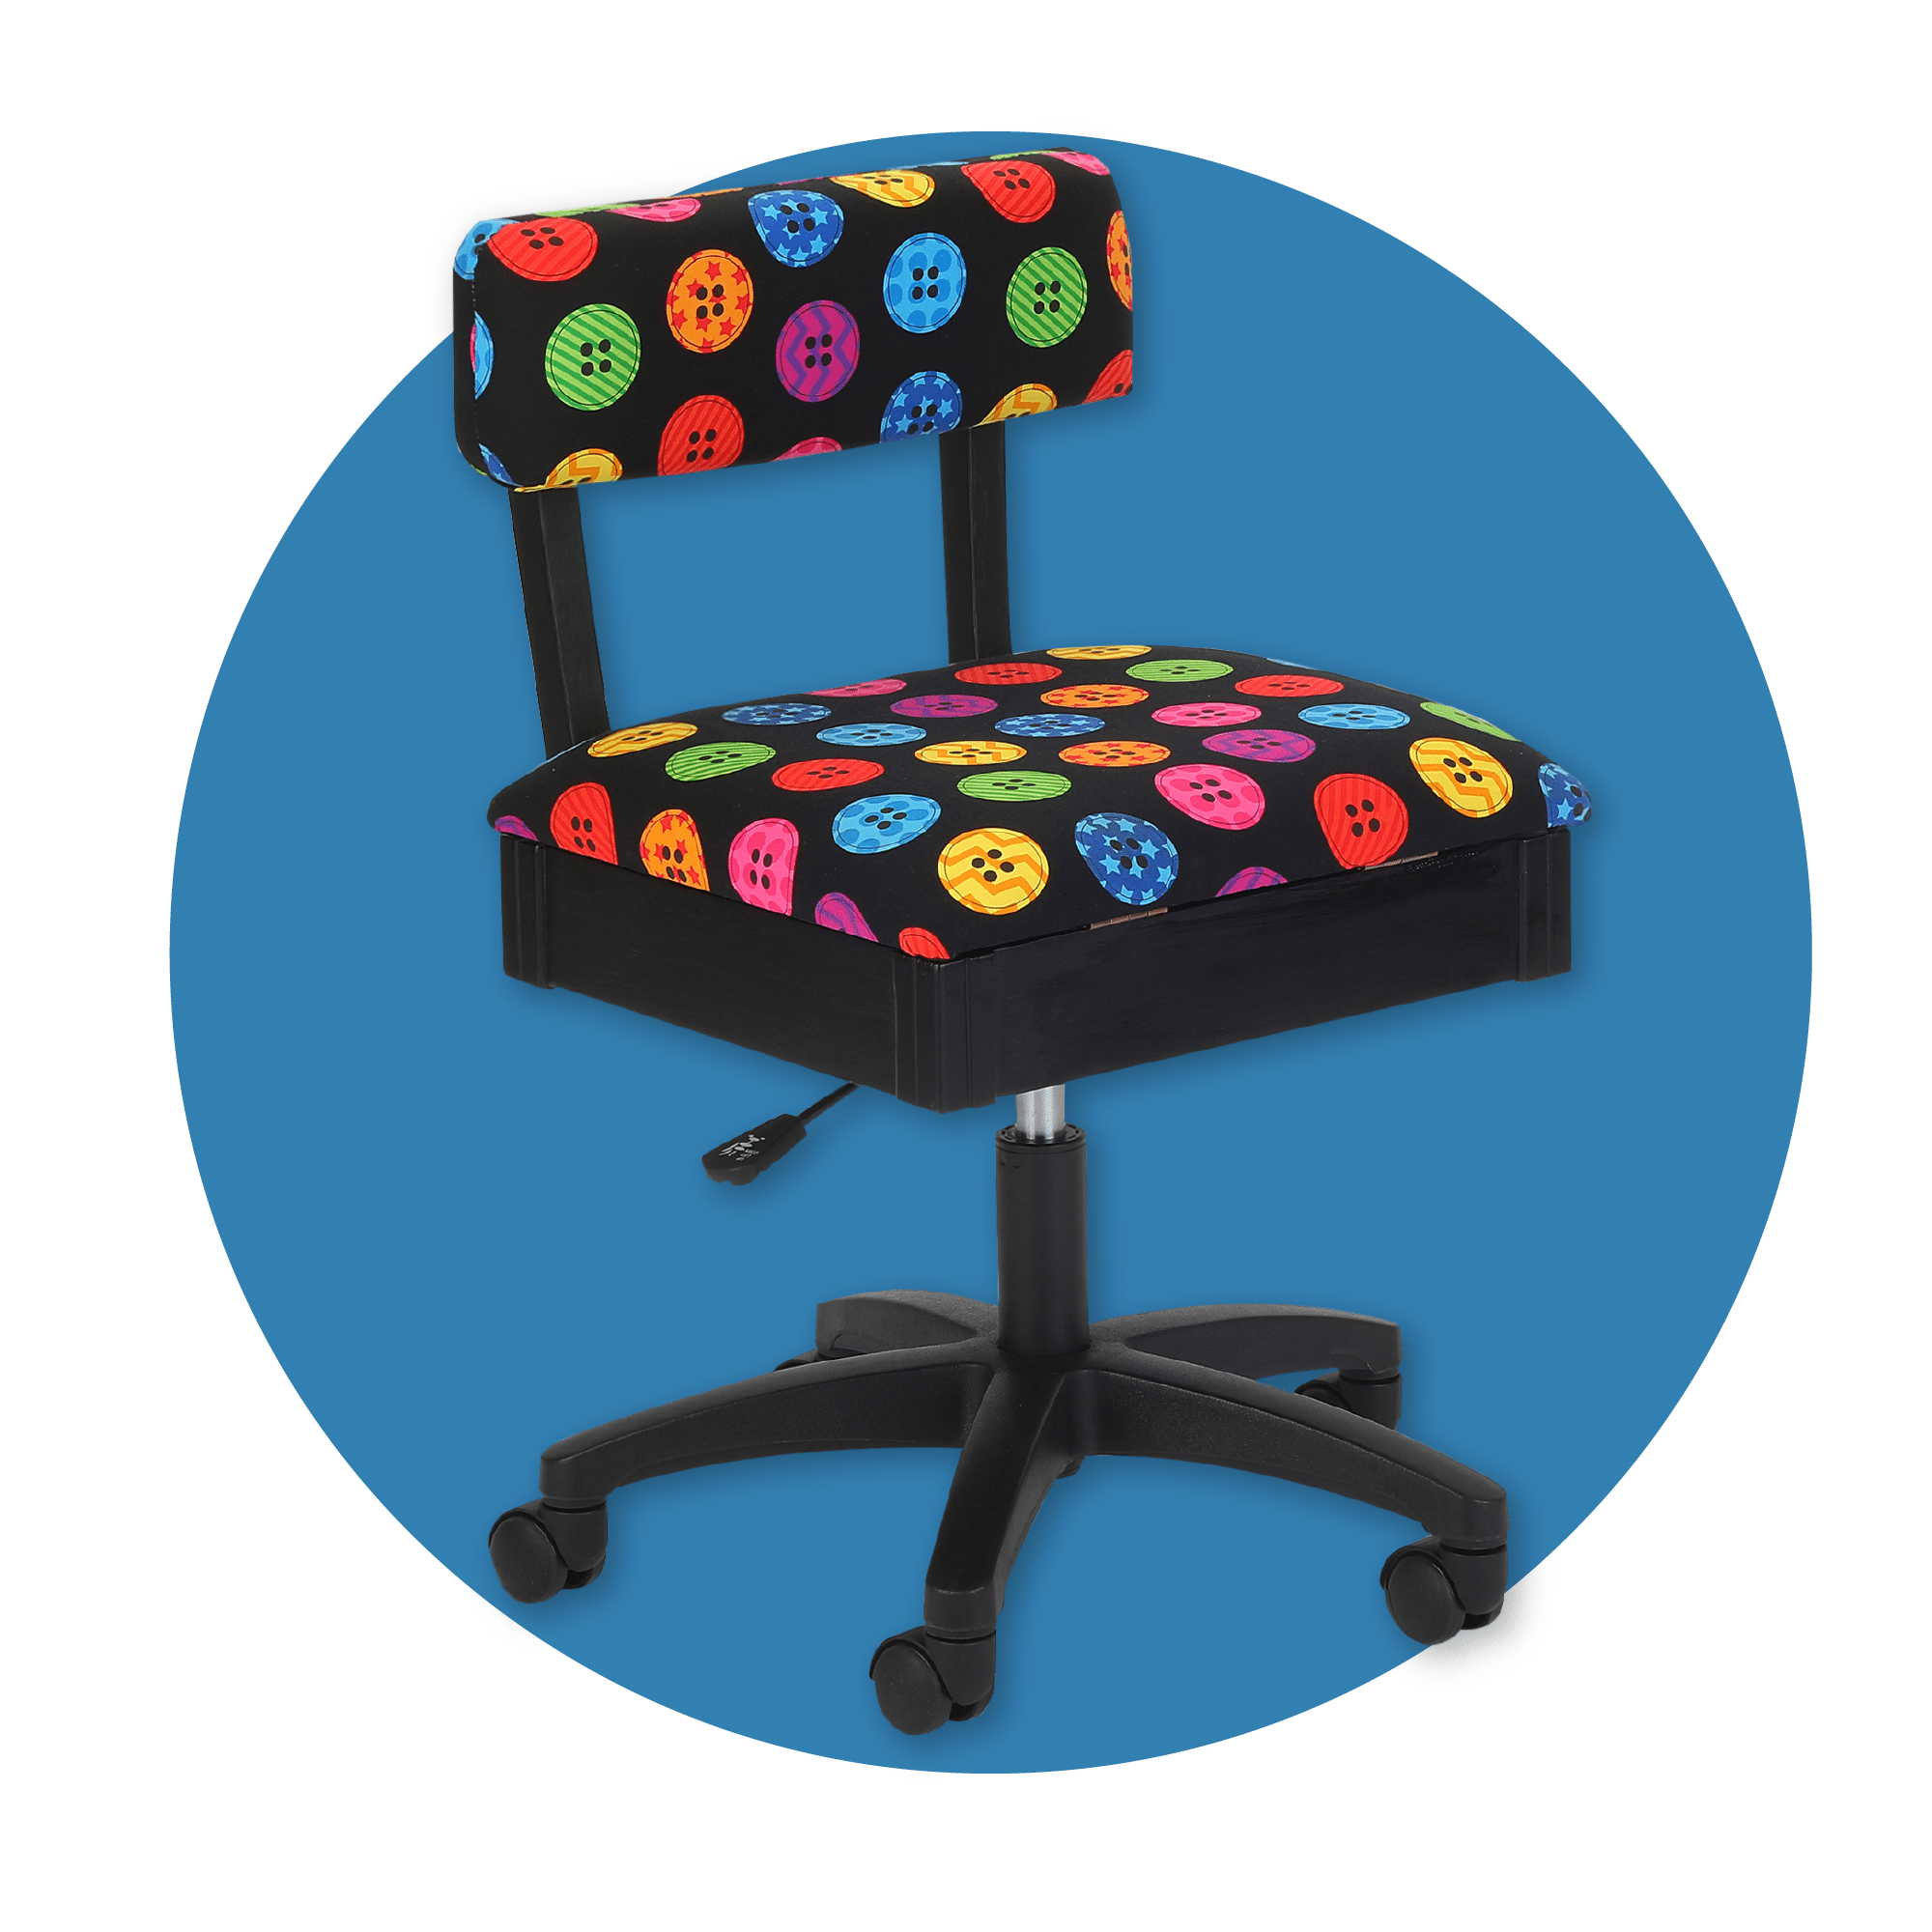 Try Out The Sew Wow Sew Now Hydraulic Sewing Chair!